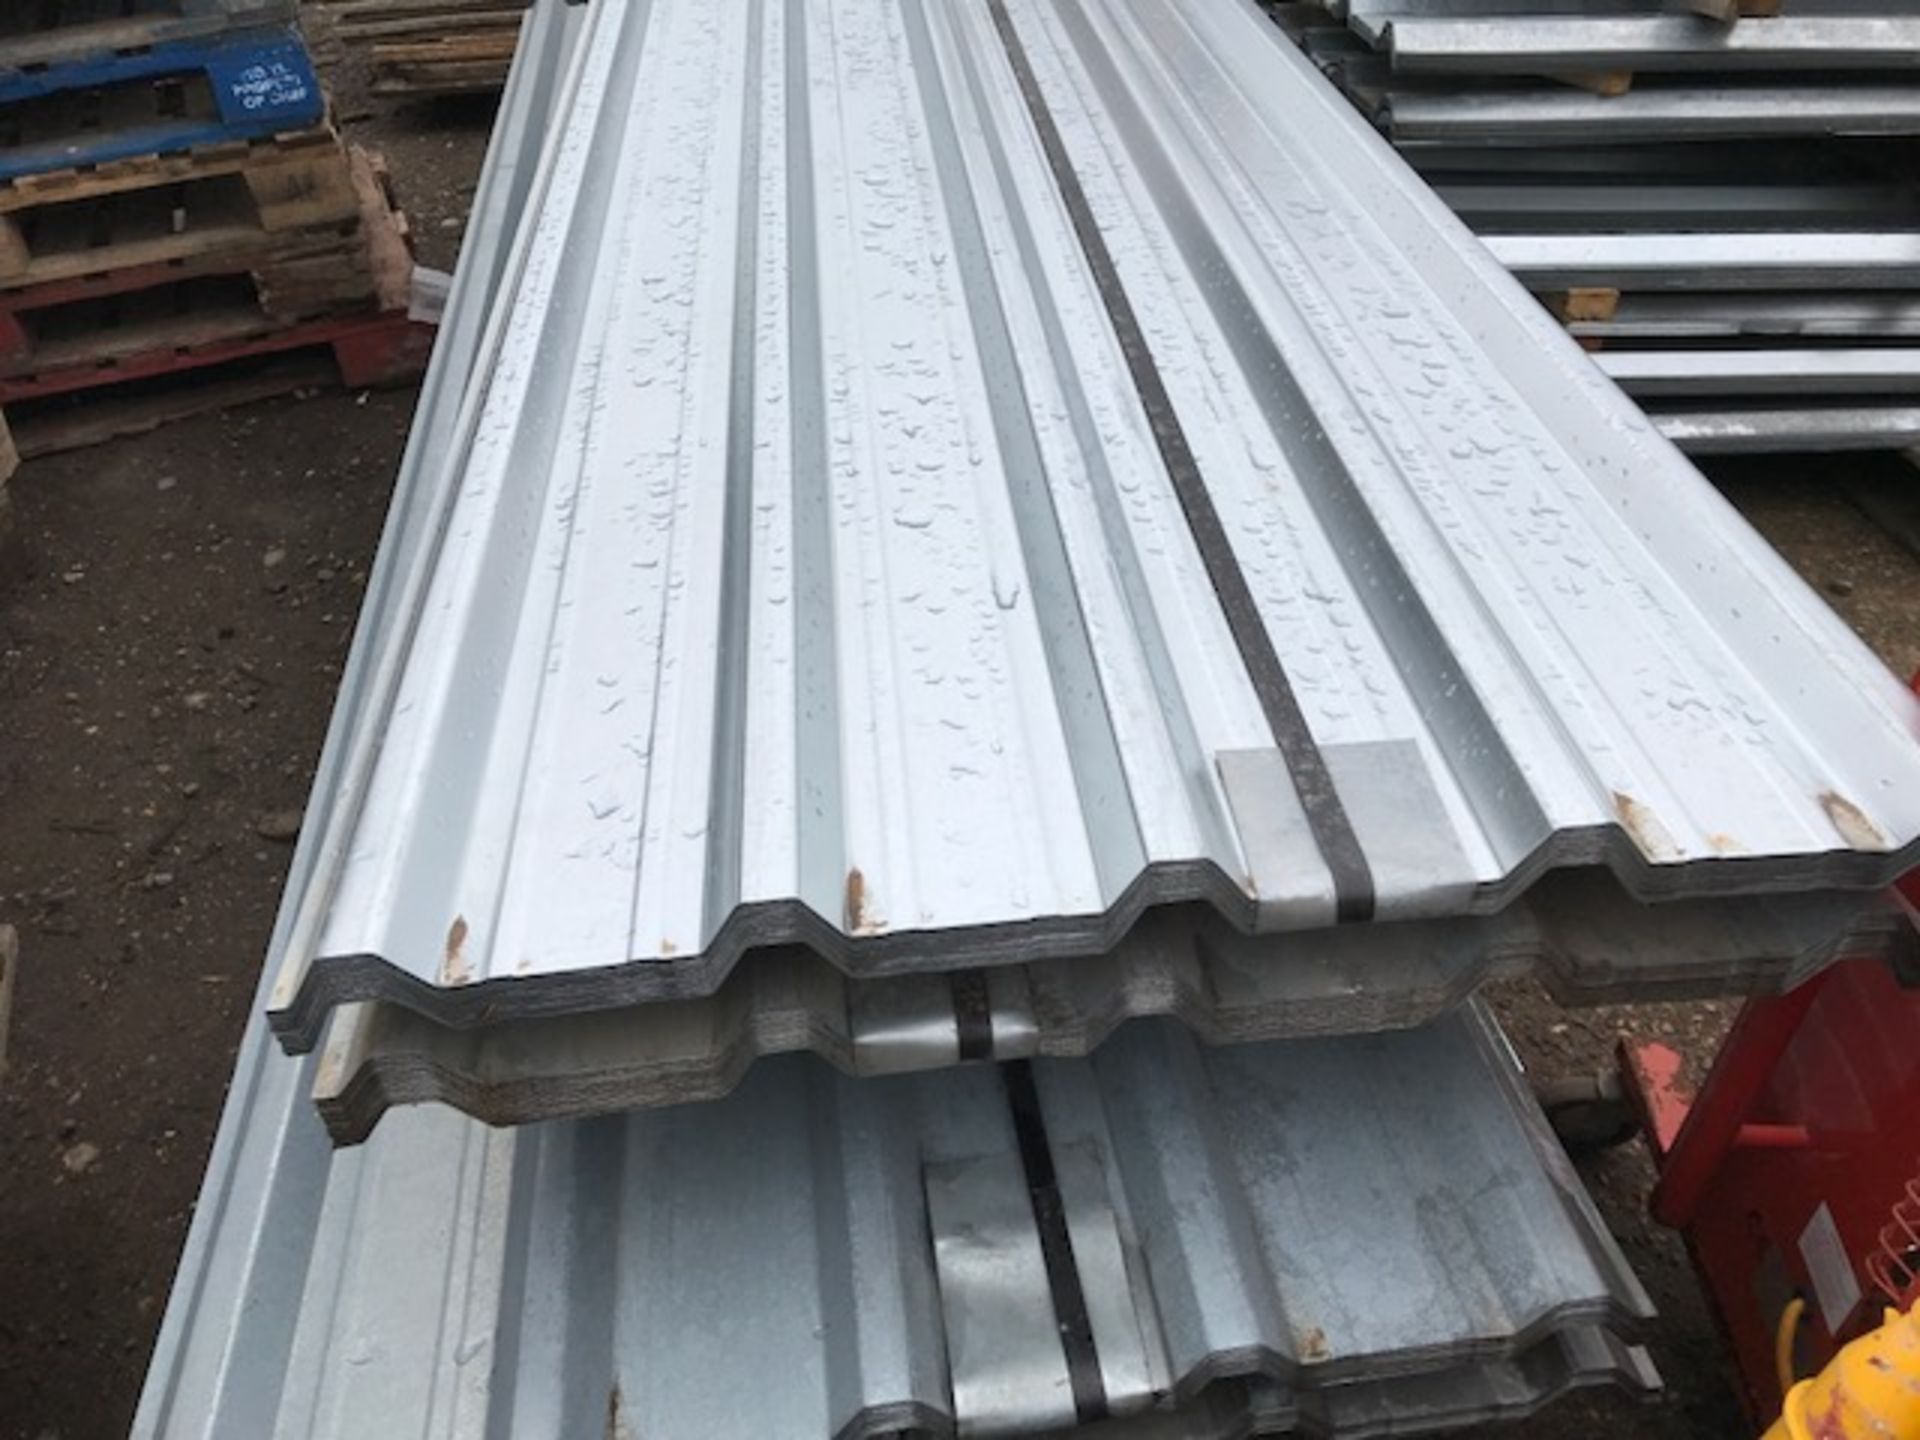 50NO 10FT BOX PROFILE GALVANISED ROOF SHEETS, SUPPLIED IN 2 BUNDLES OF 25NO.